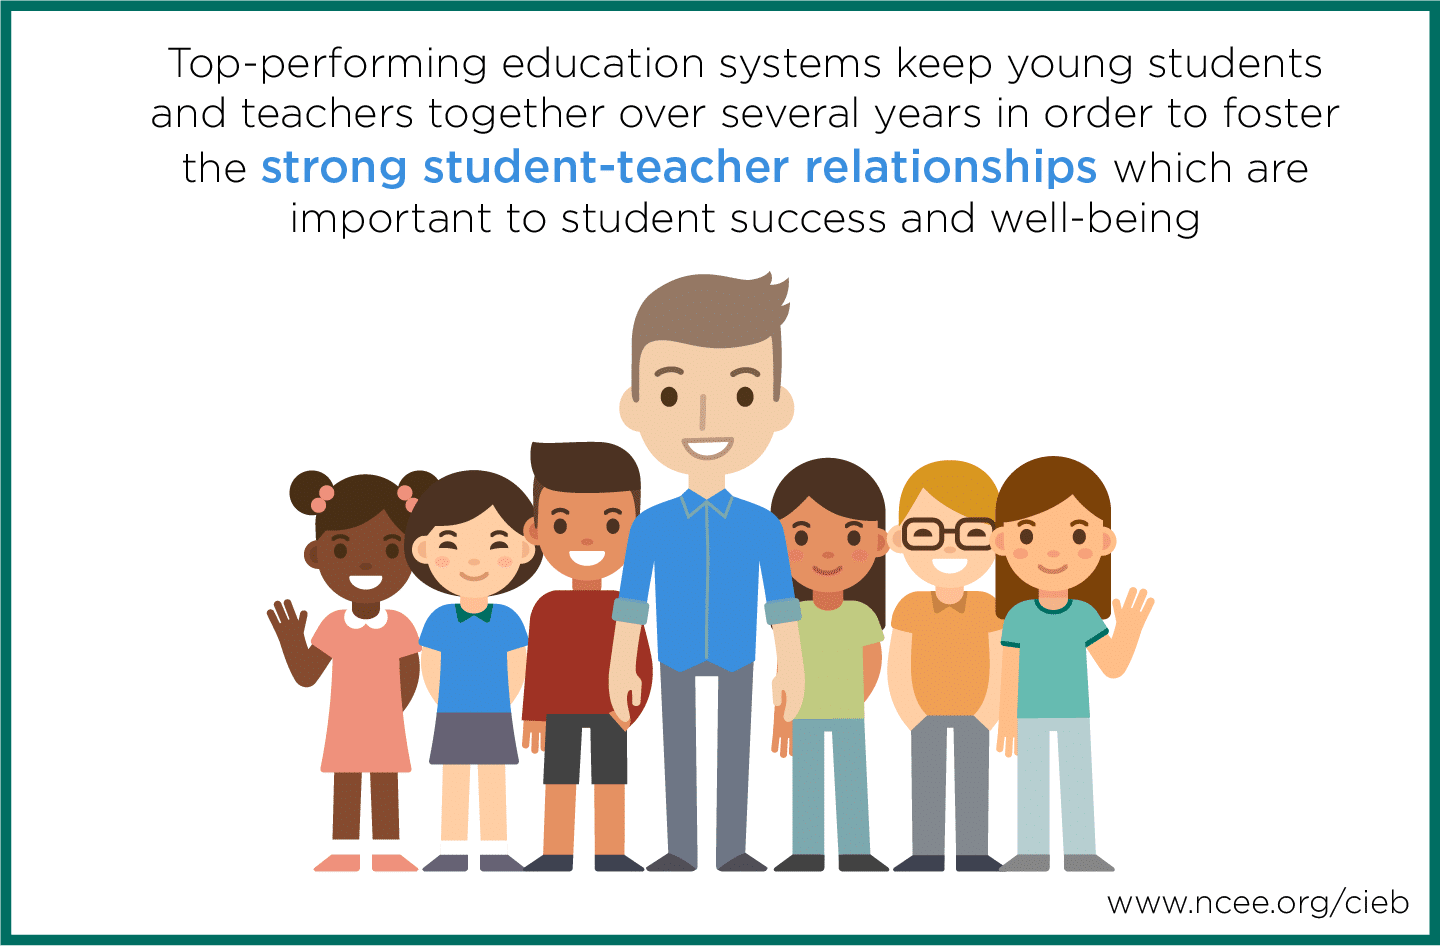 Top-performing education systems keep young students and teachers together over several years in order to foster the strong student-teacher relationships which are important to student success and well-being